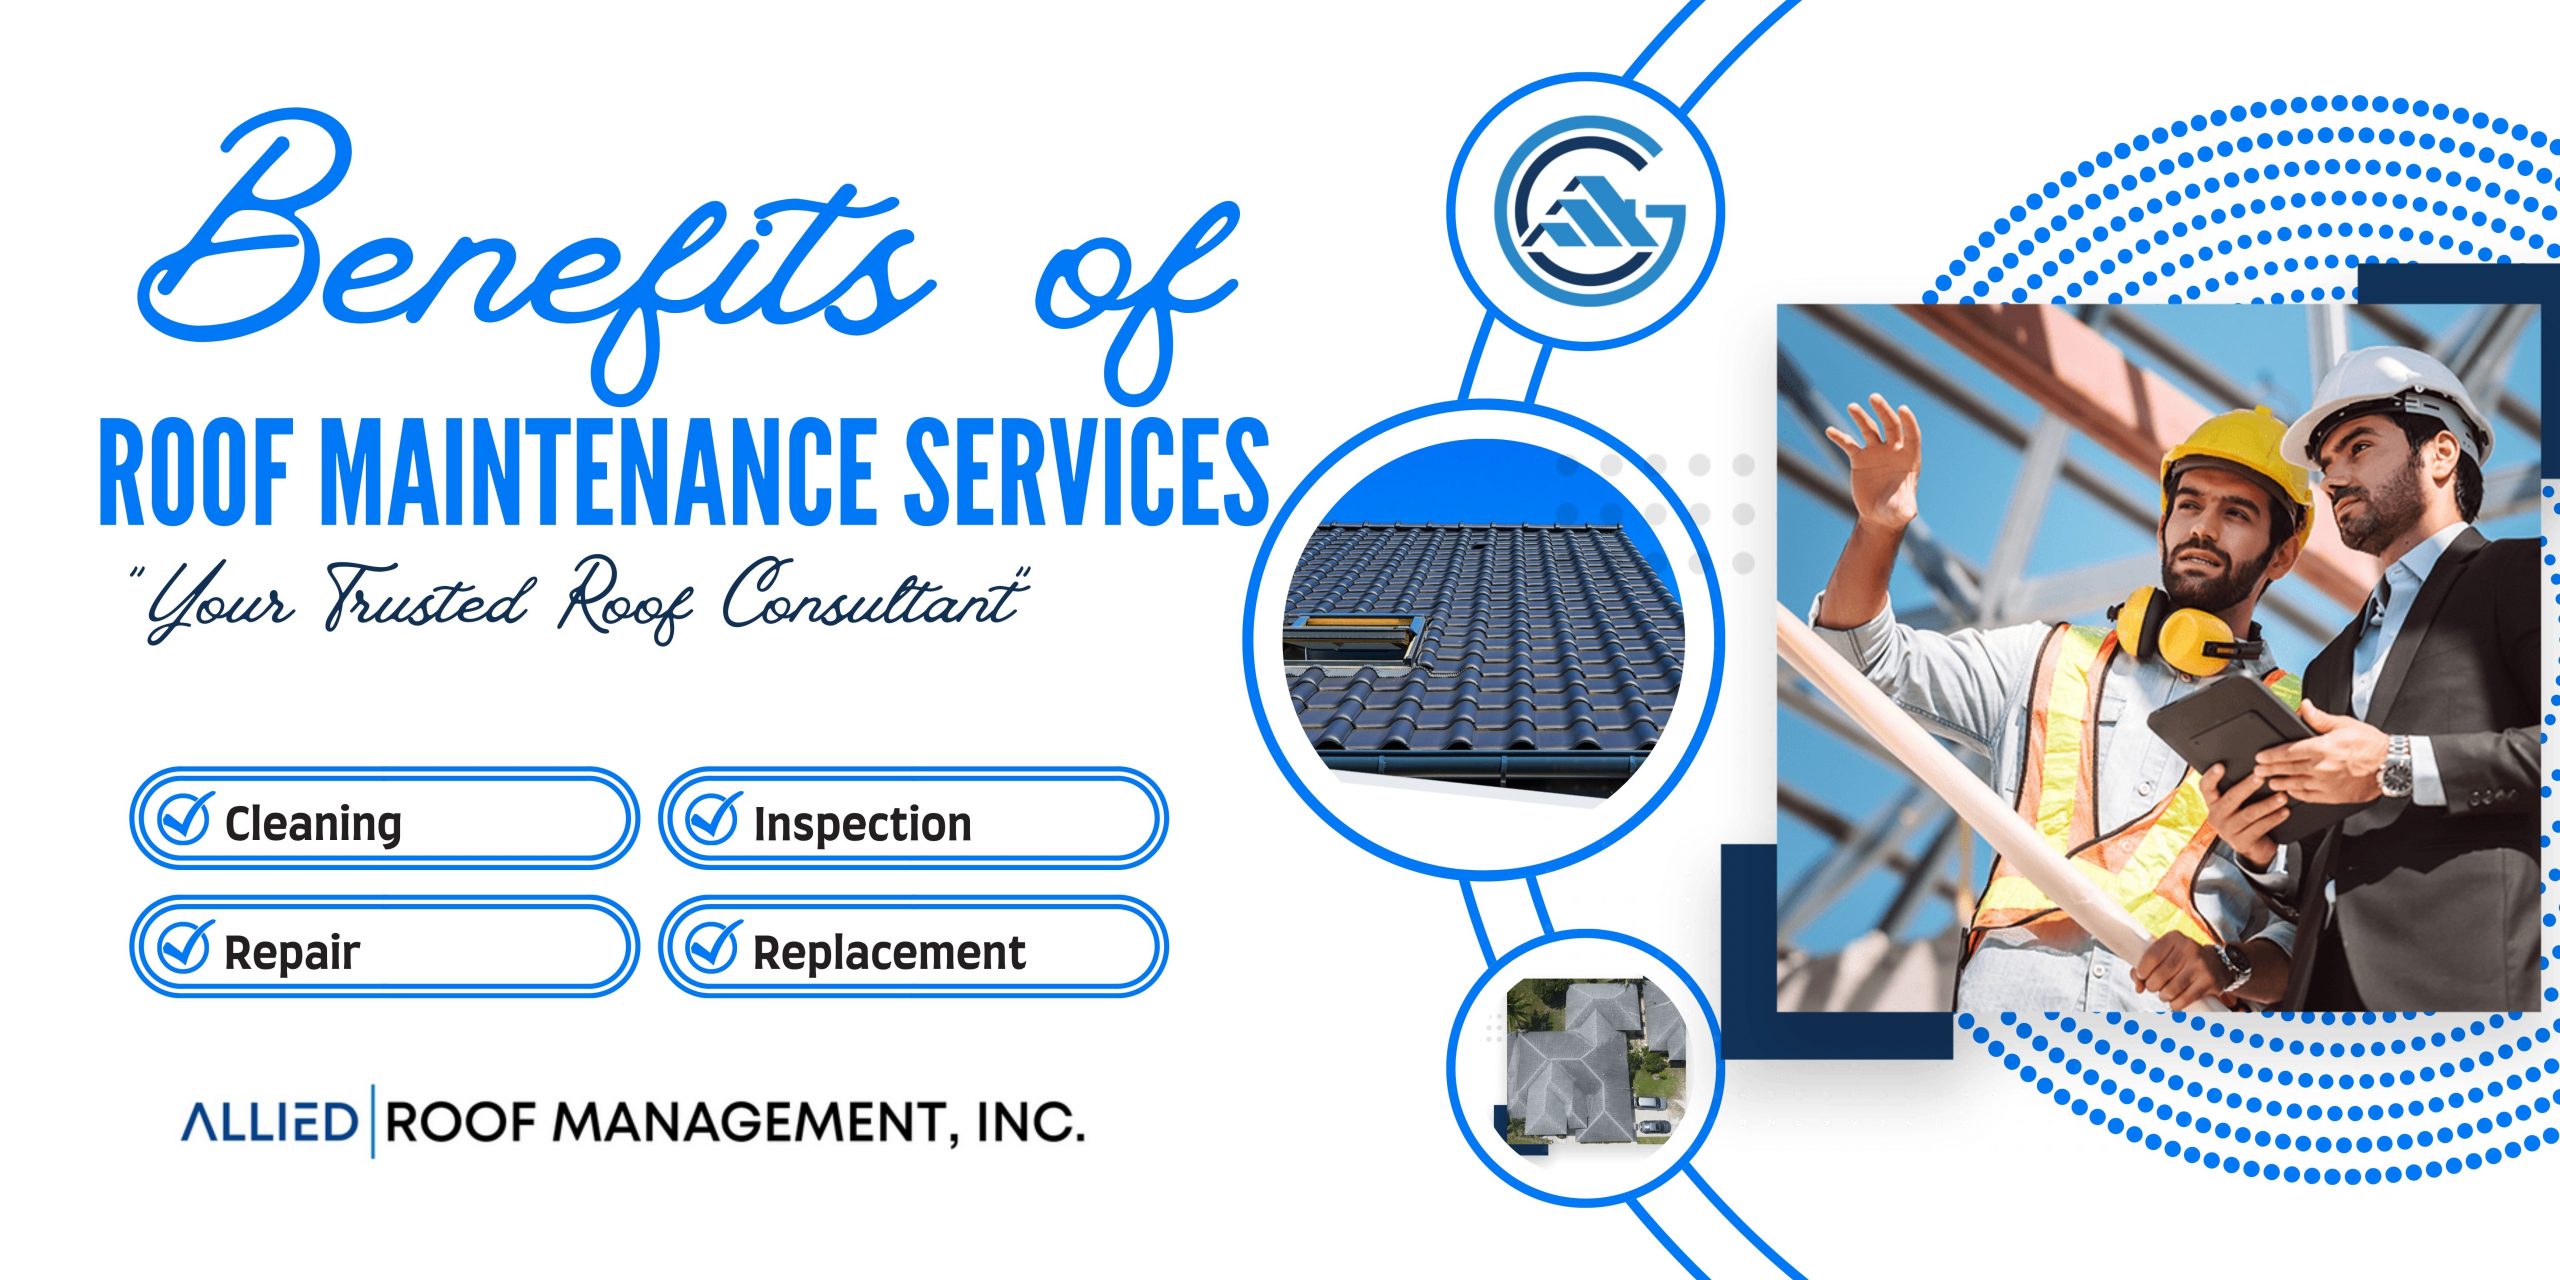 Benefits of roof maintenance services- Allied roofing florida